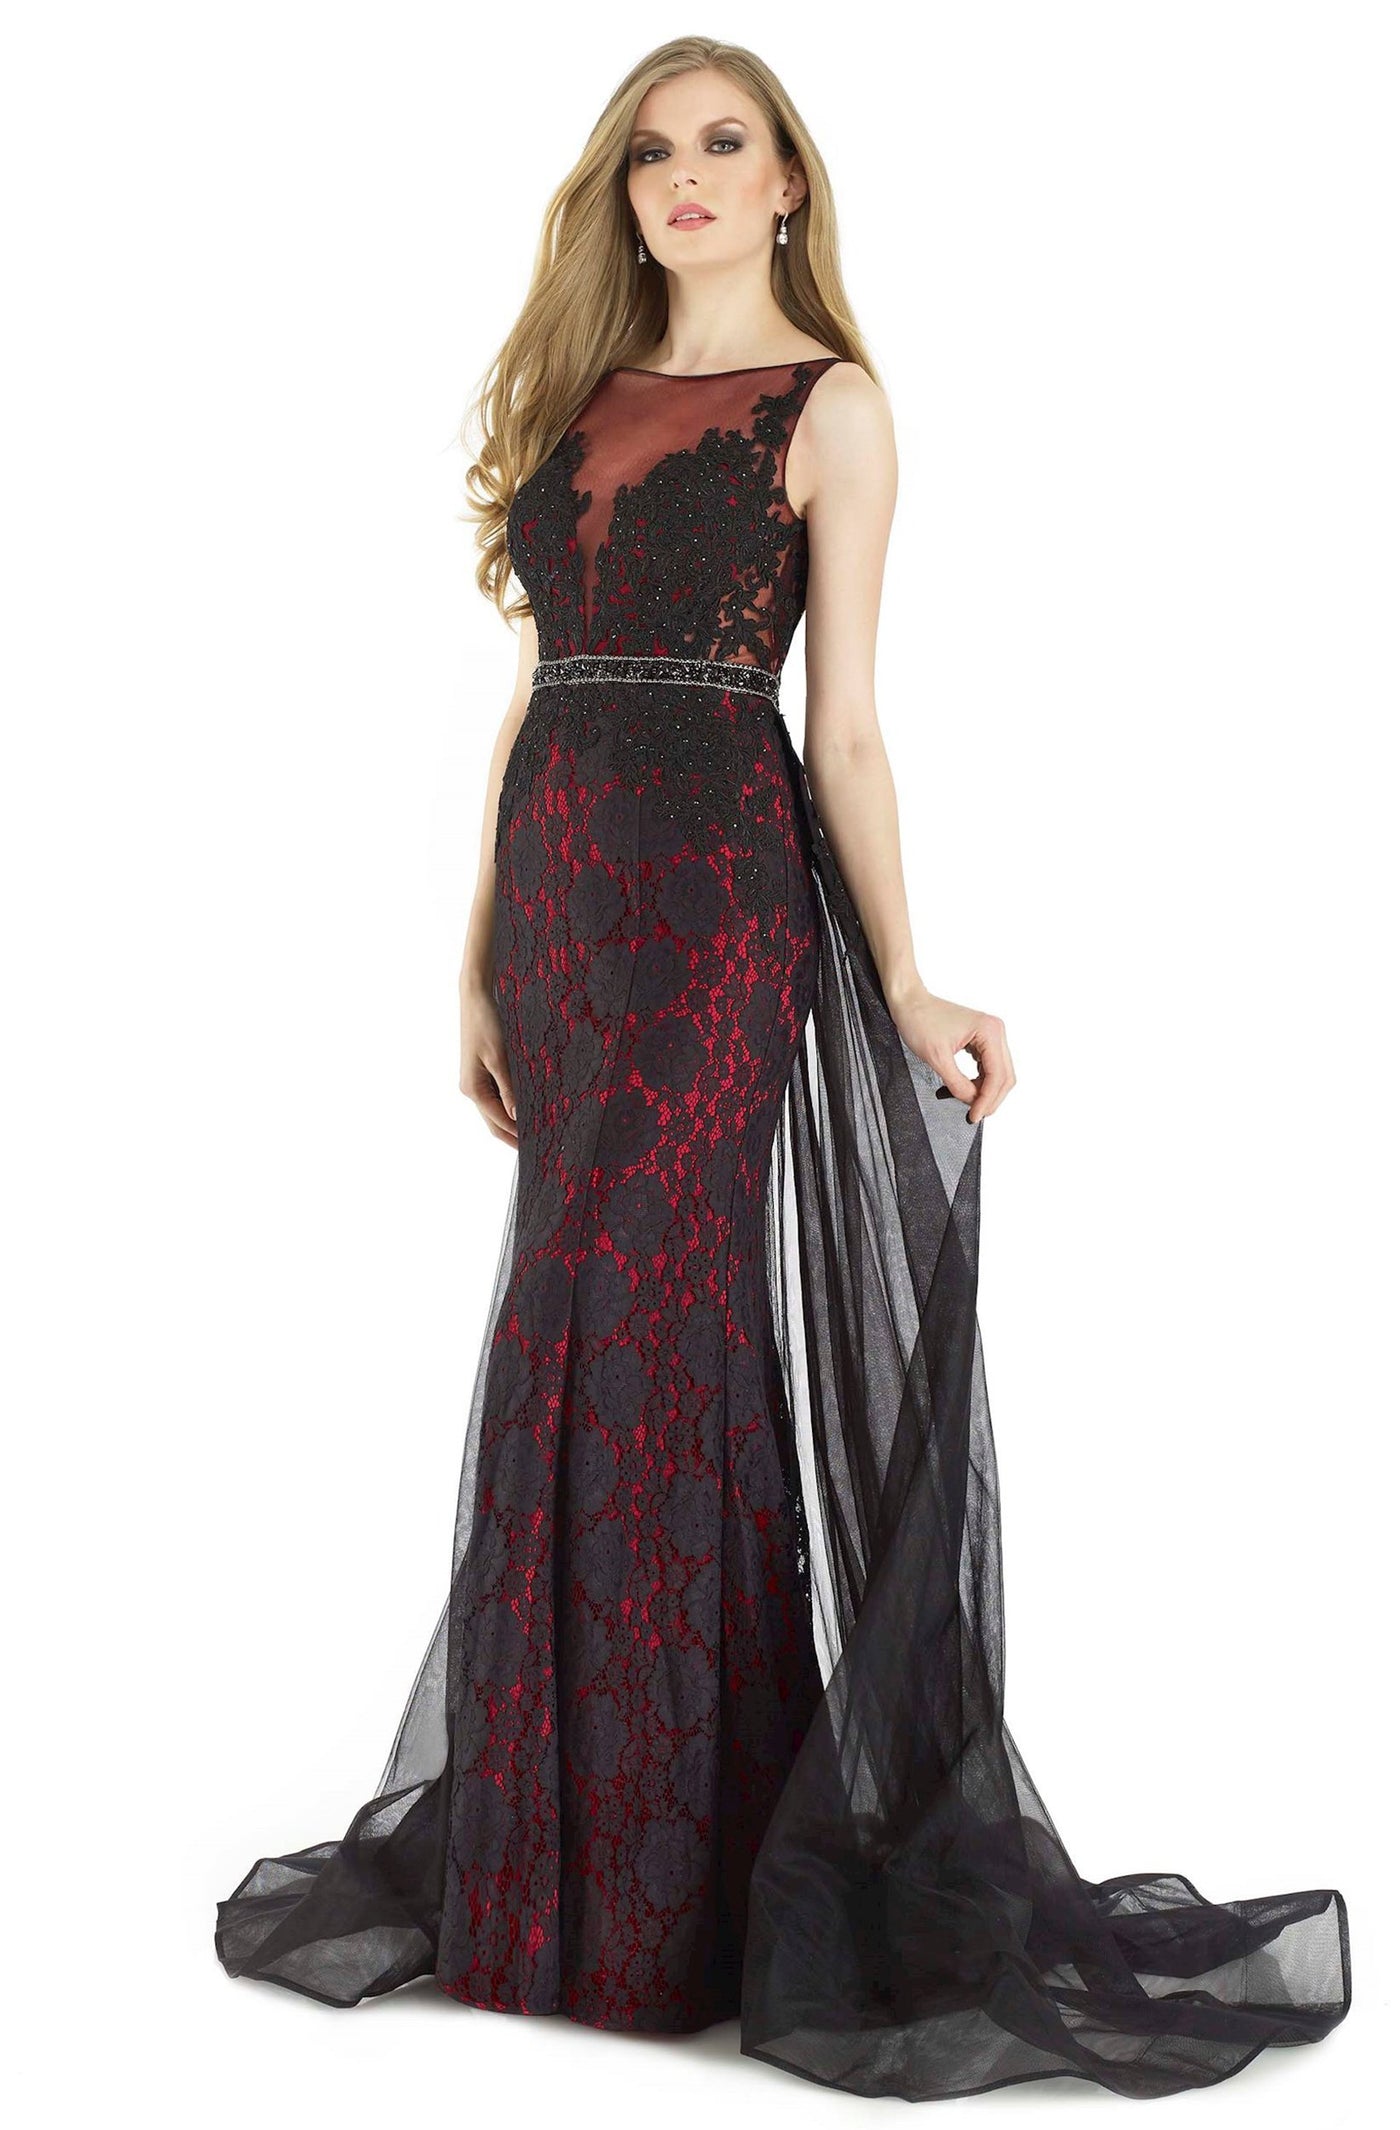 Morrell Maxie - 15927 Embellished Lace Illusion Bateau Sheath Dress in Black and Red